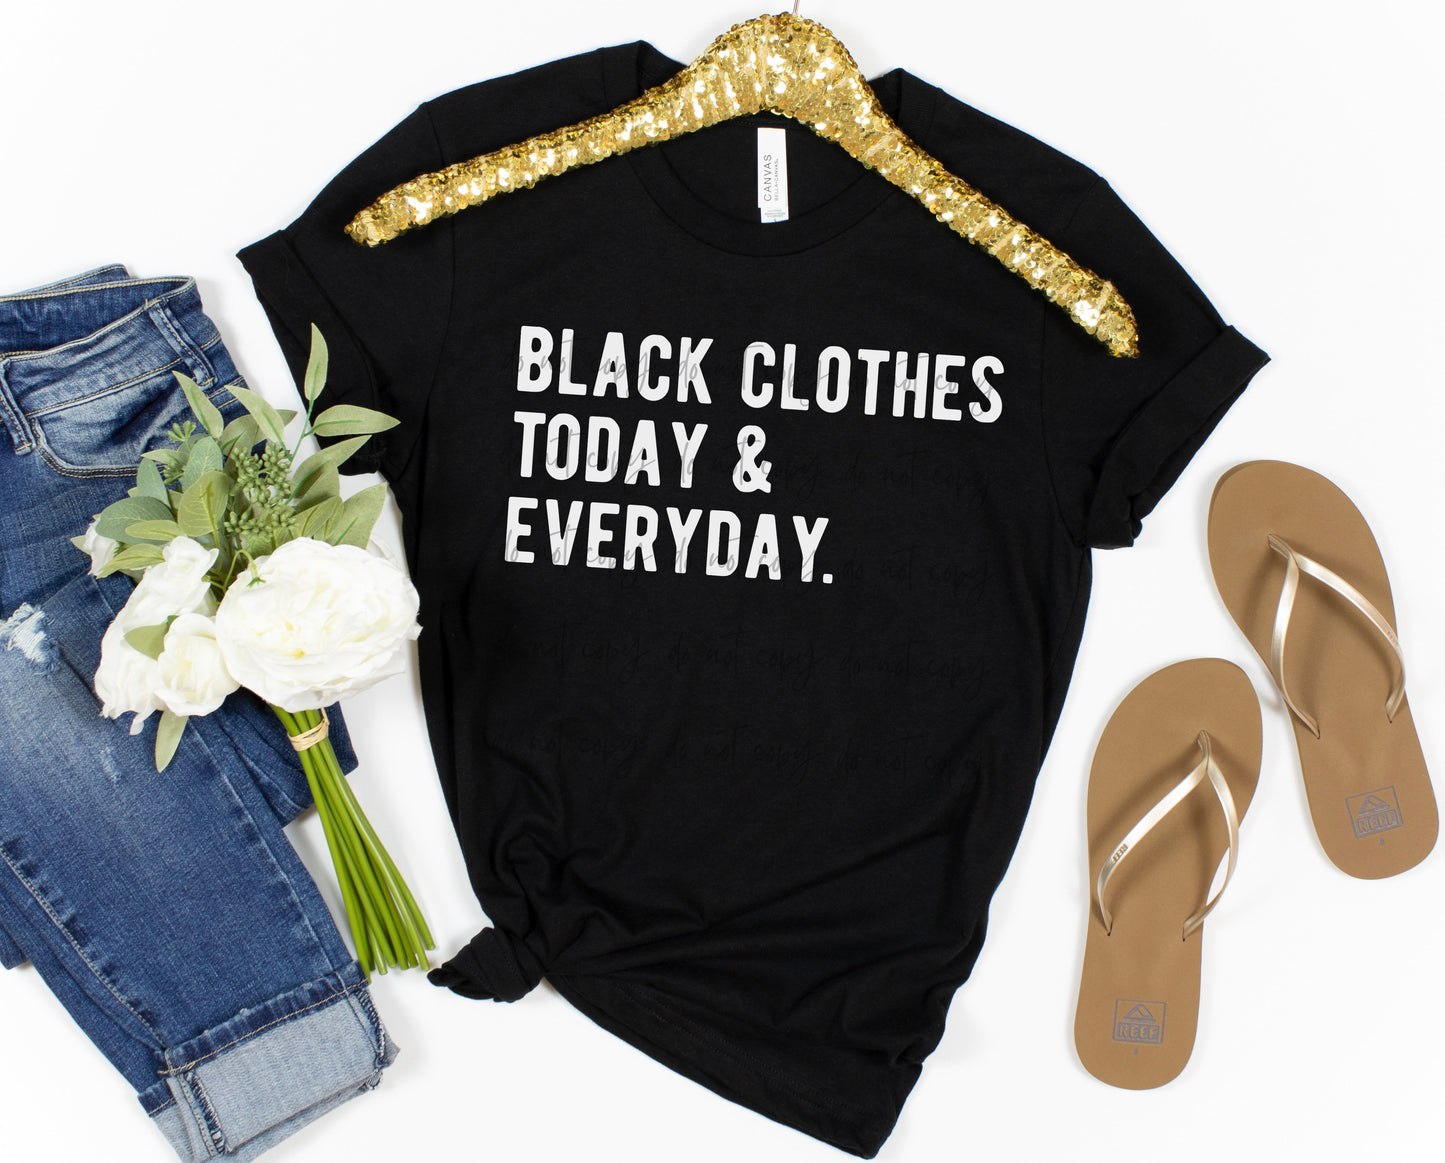 Black Clothes Today & Everyday. - Black Tee -